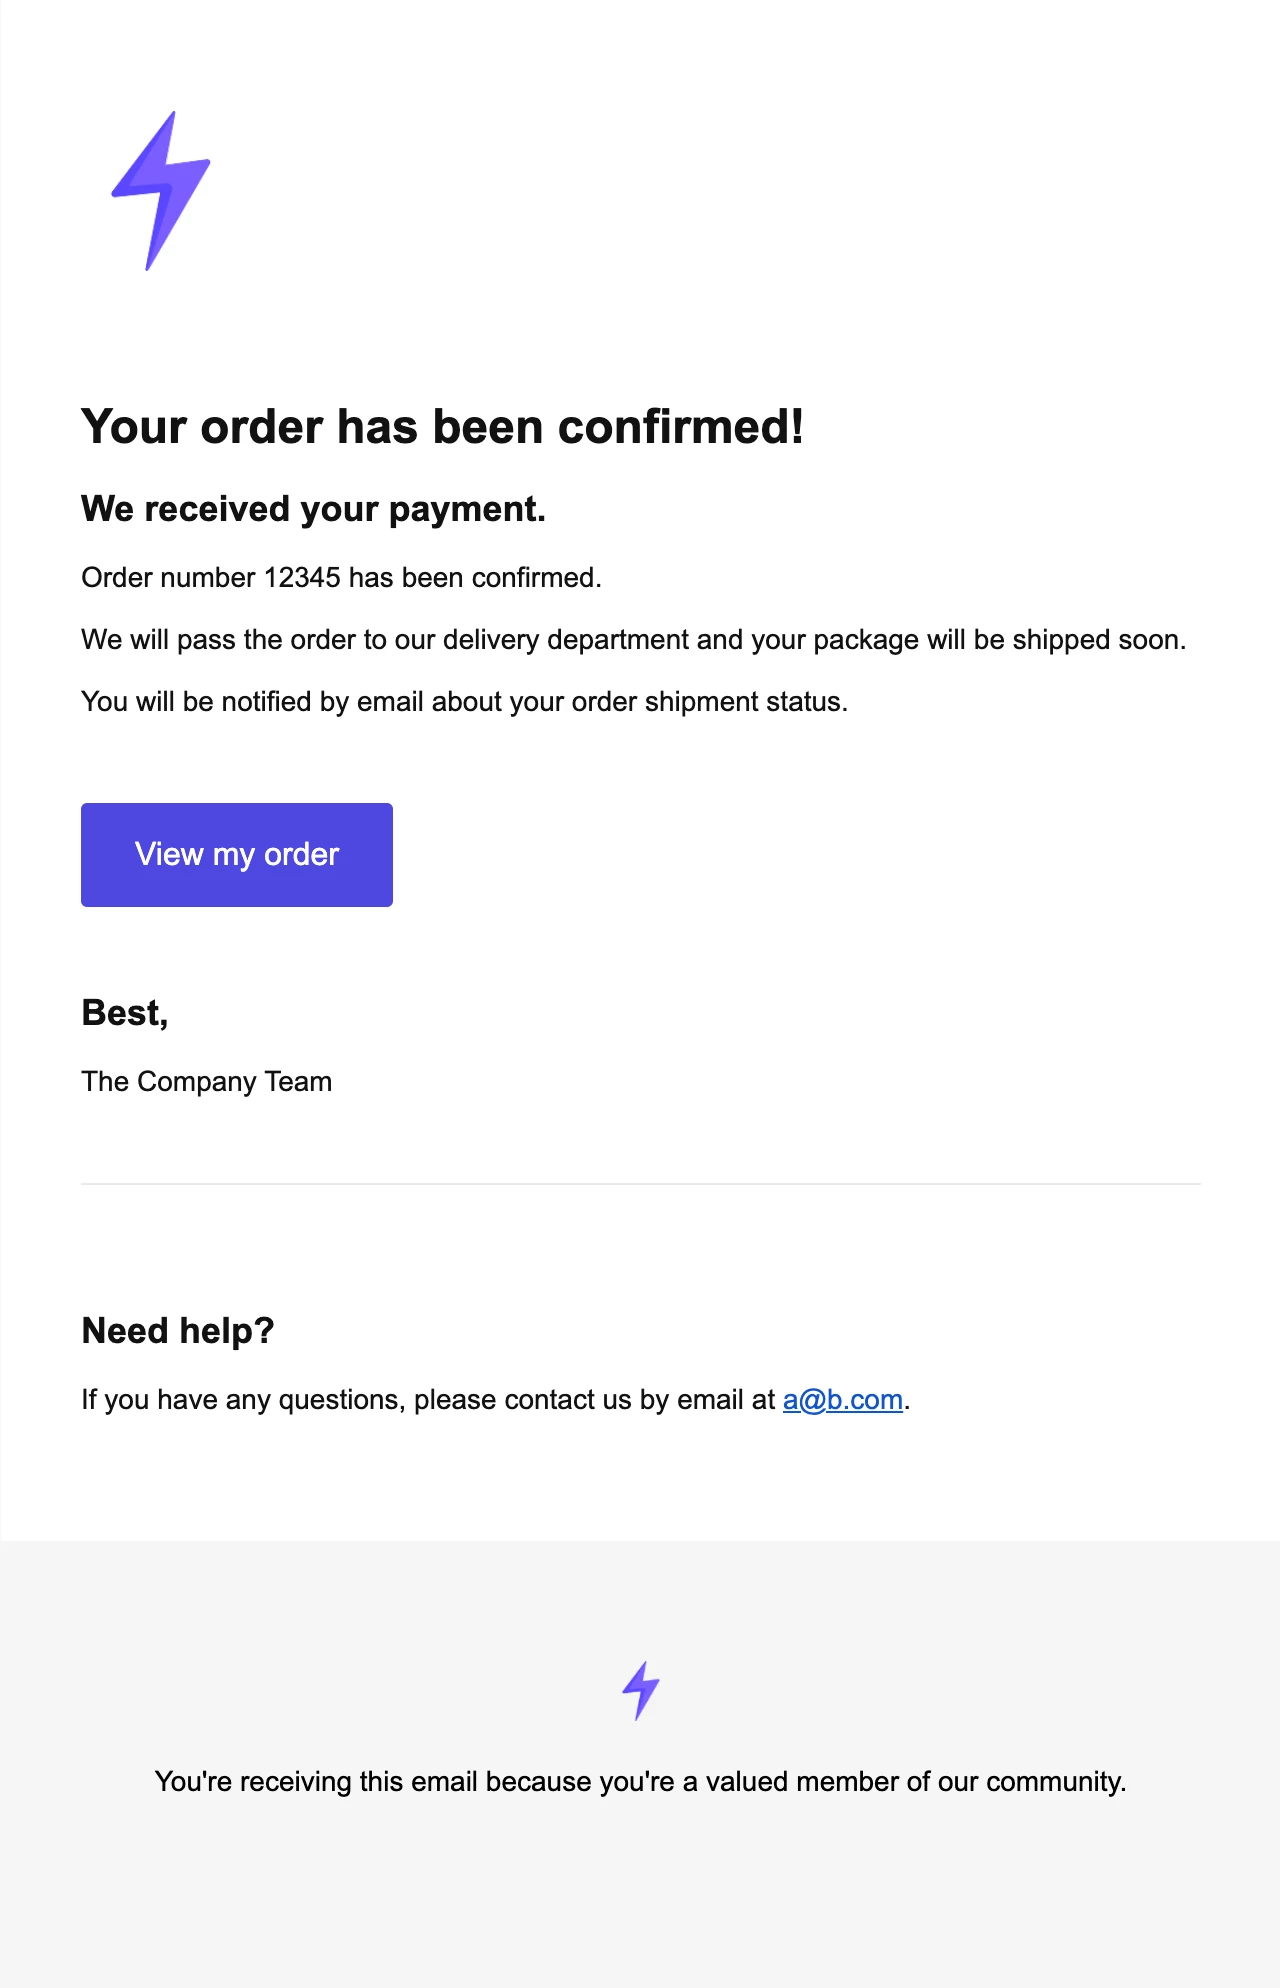 order confirmation transactional email example